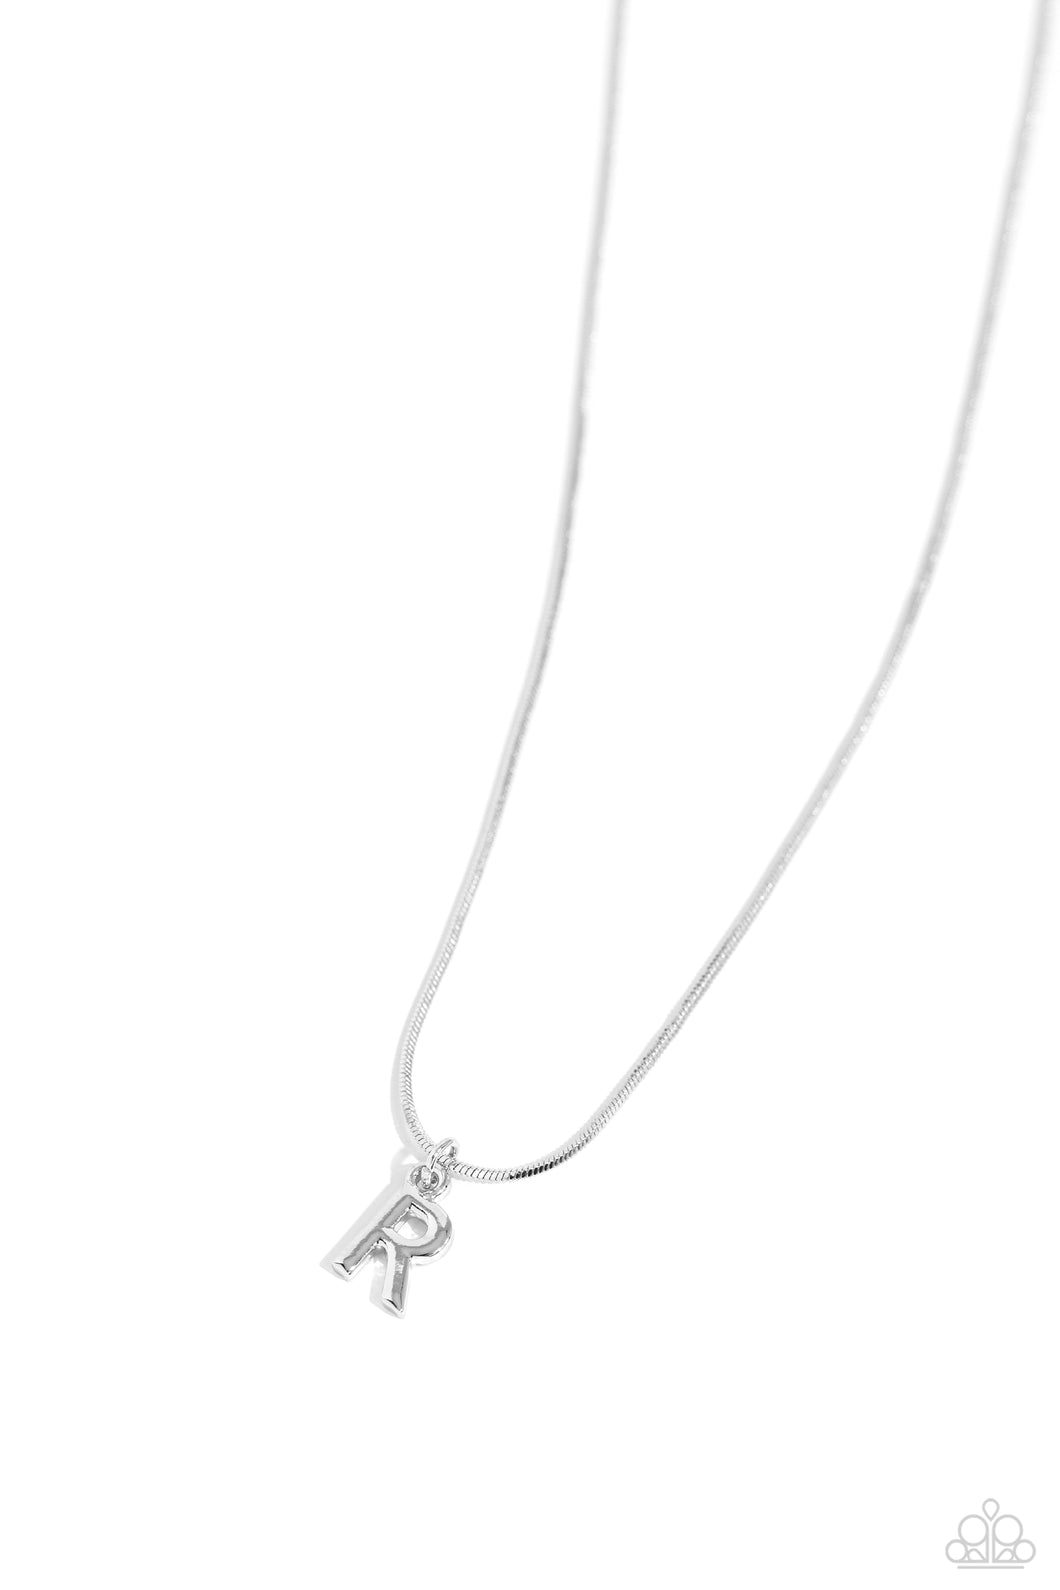 Seize the Initial - Silver - R - Necklace - Paparazzi - Dare2bdazzlin N Jewelry